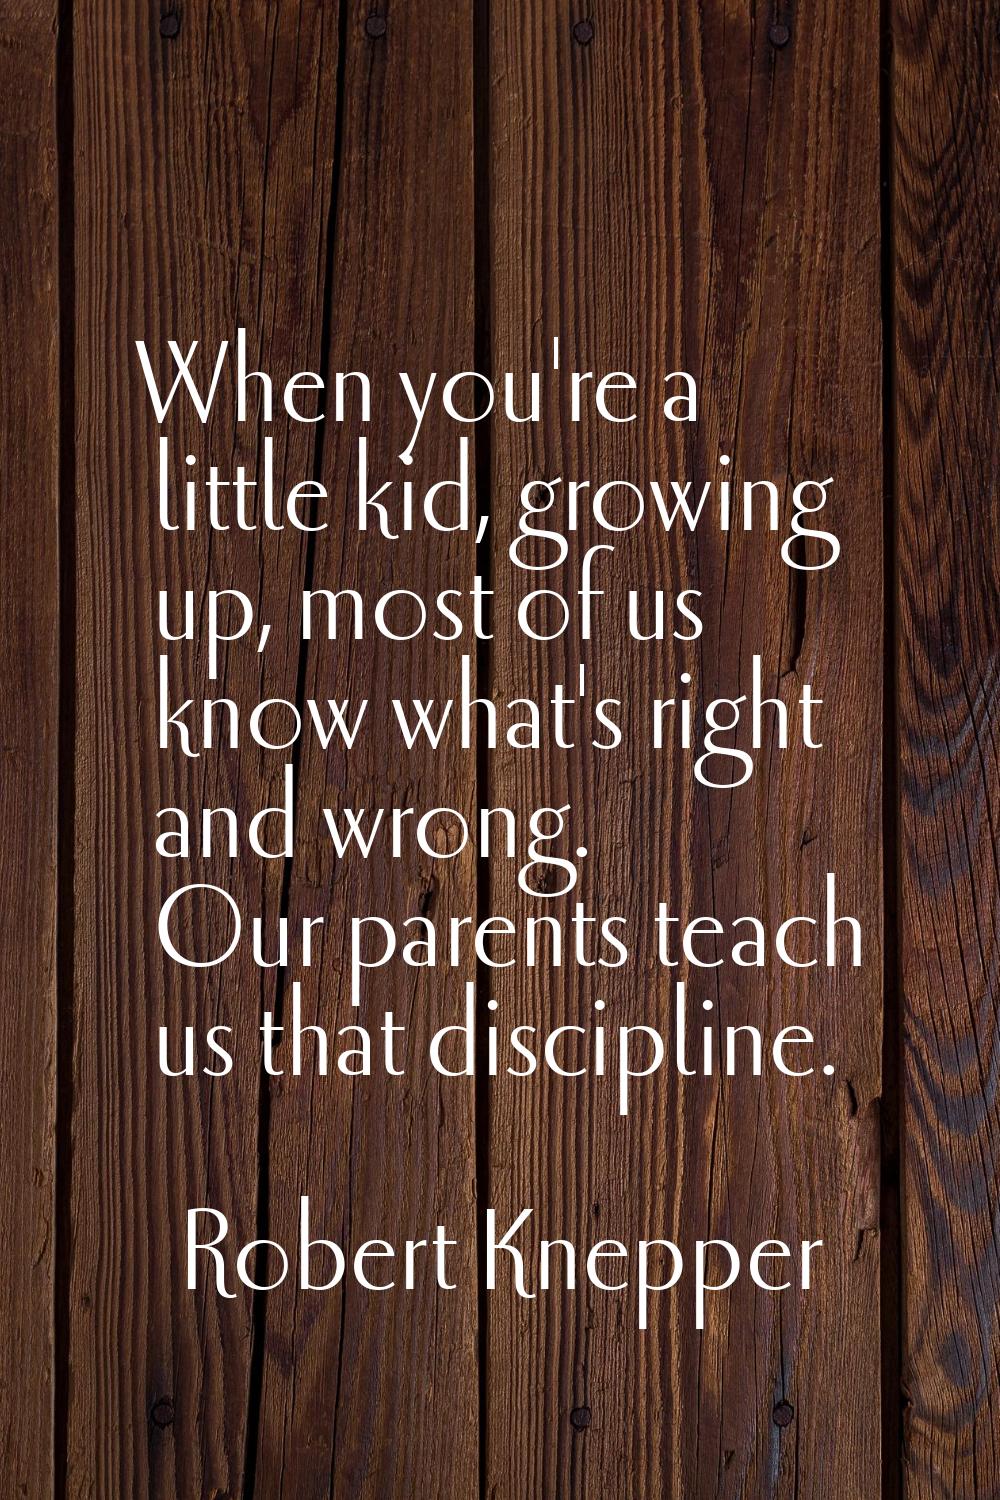 When you're a little kid, growing up, most of us know what's right and wrong. Our parents teach us 